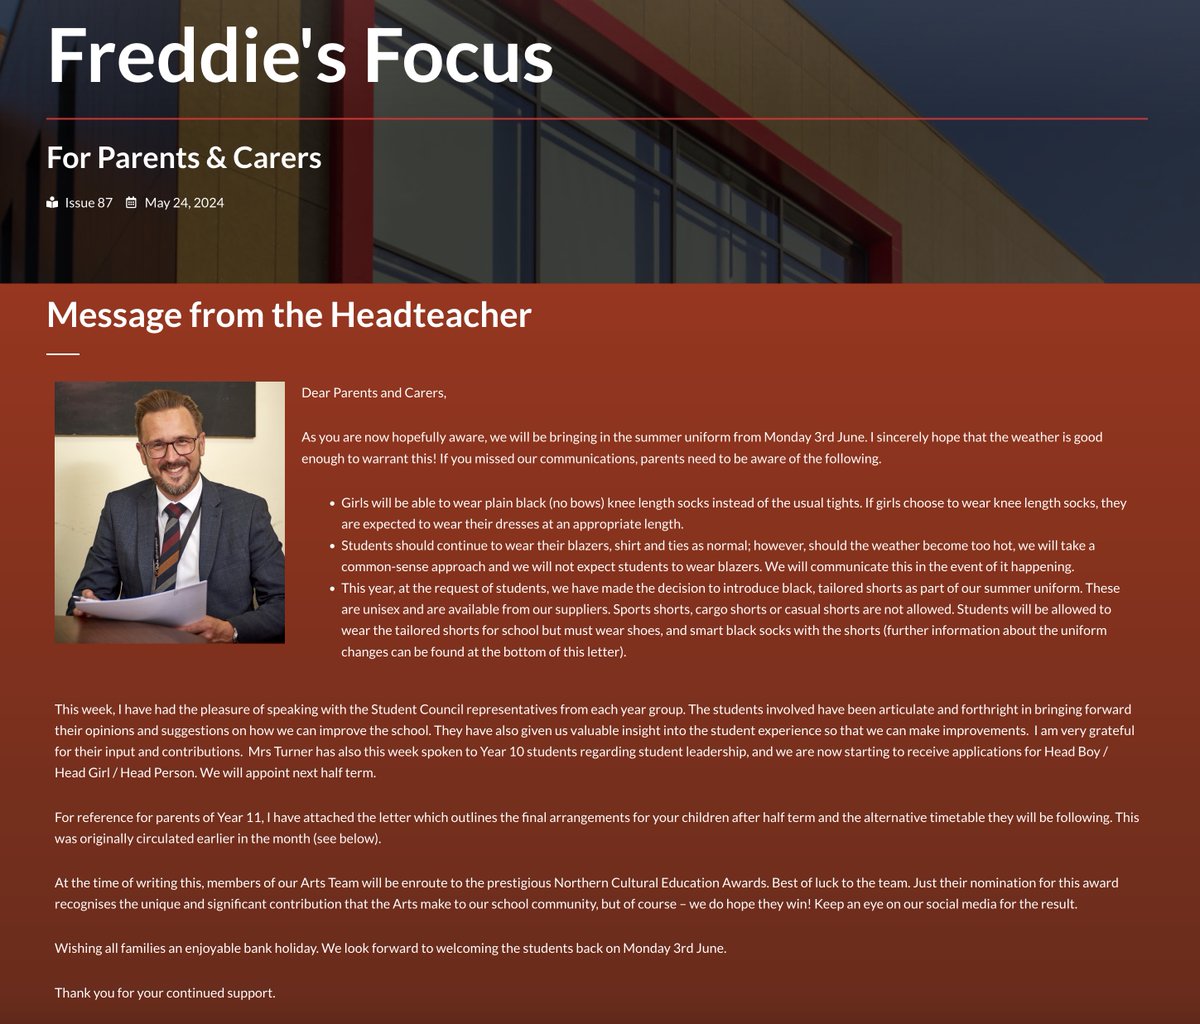 This week's Freddie's Focus for Parents & Carers has been emailed out this afternoon. Here's a link to it on the school website. Have a great half-term break! flhs.org.uk/freddies-focus…